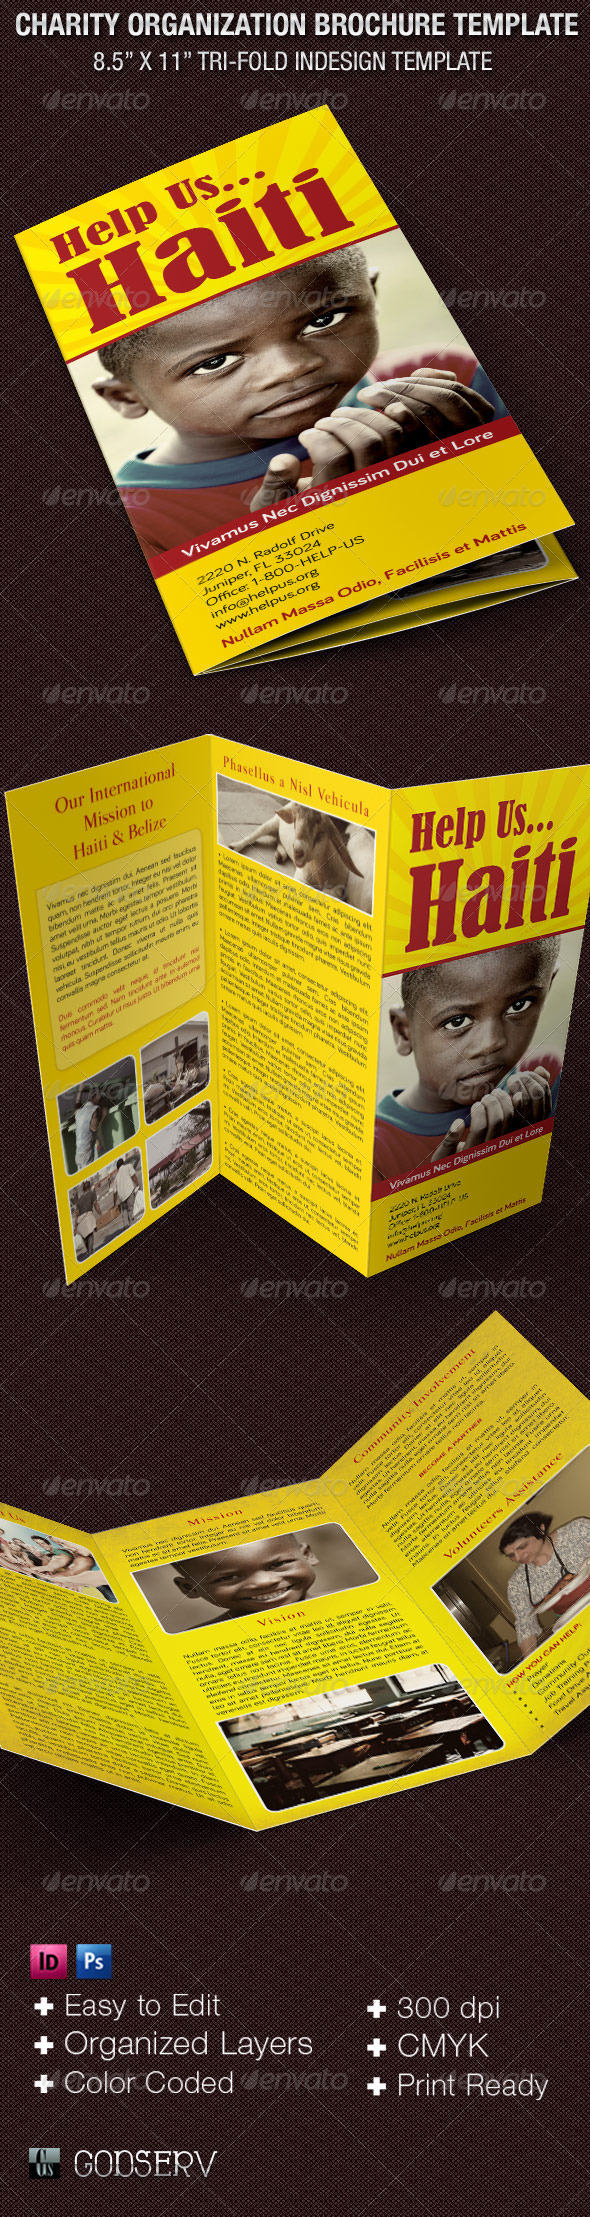 Charity-Organization-Brochure-Template-Preview